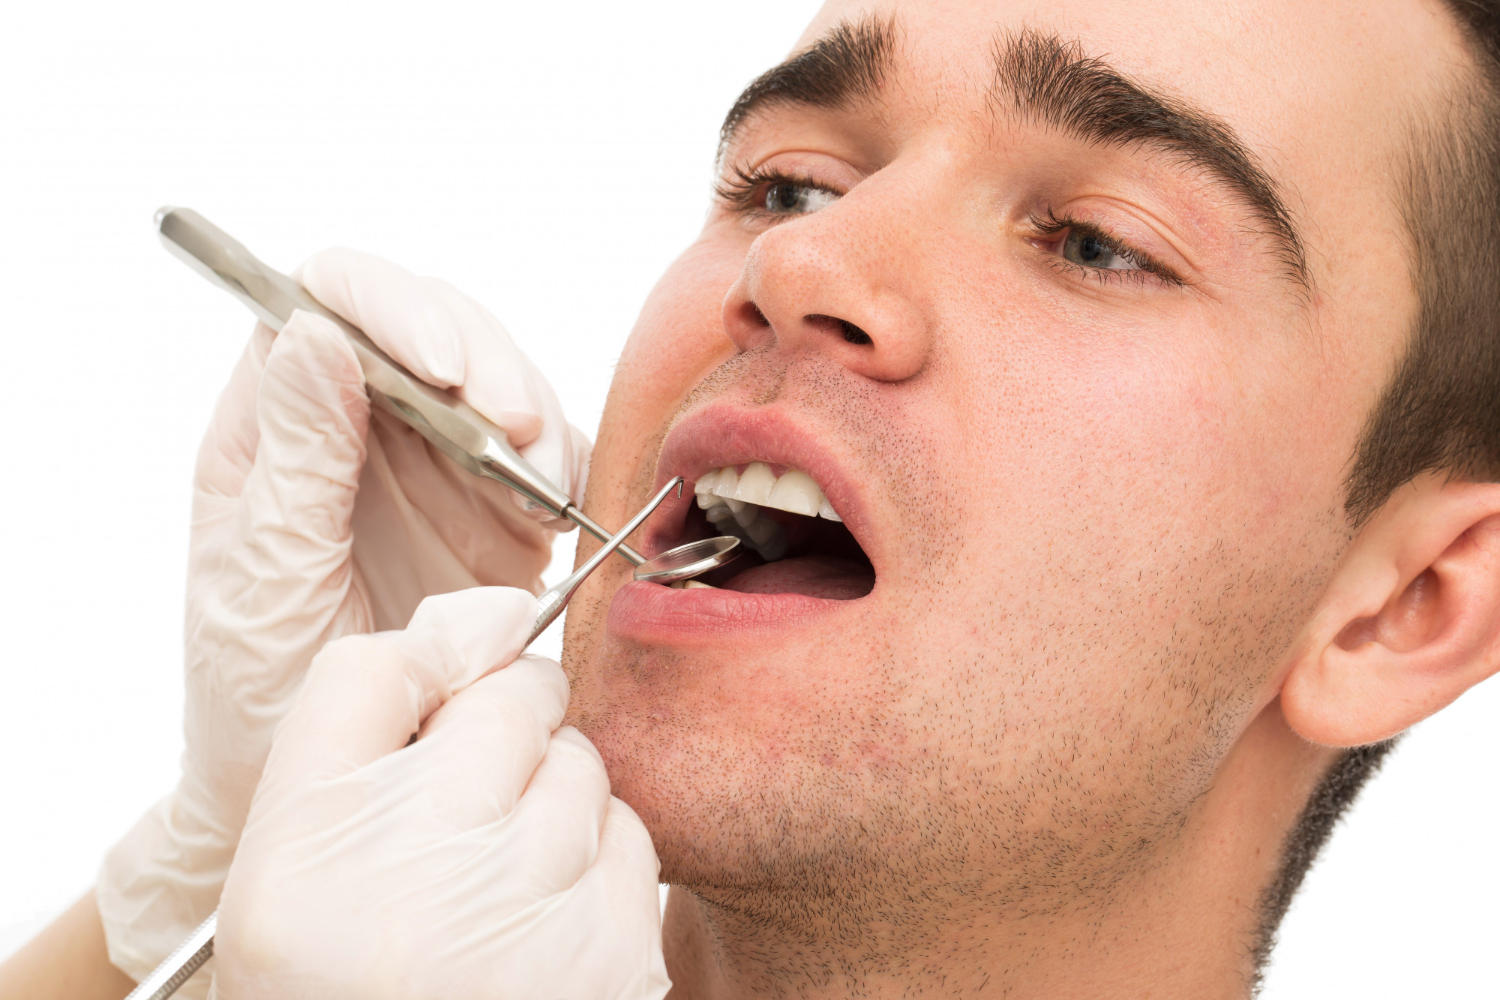 How are chipped teeth repaired